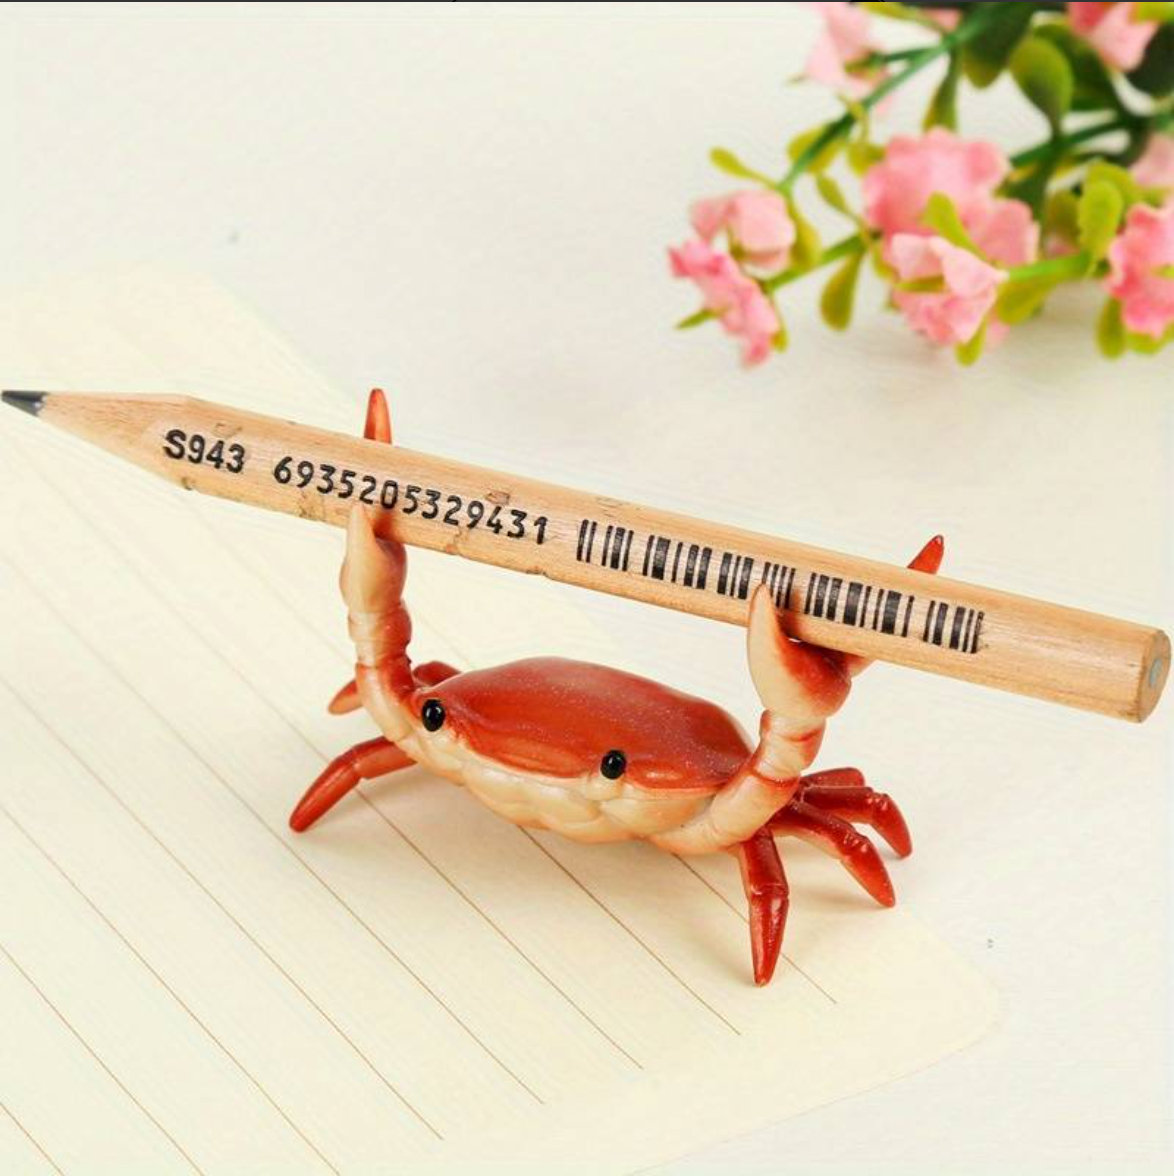  Cute Weightlifting Crabs Desk Organizer for Fun and Creative Storage